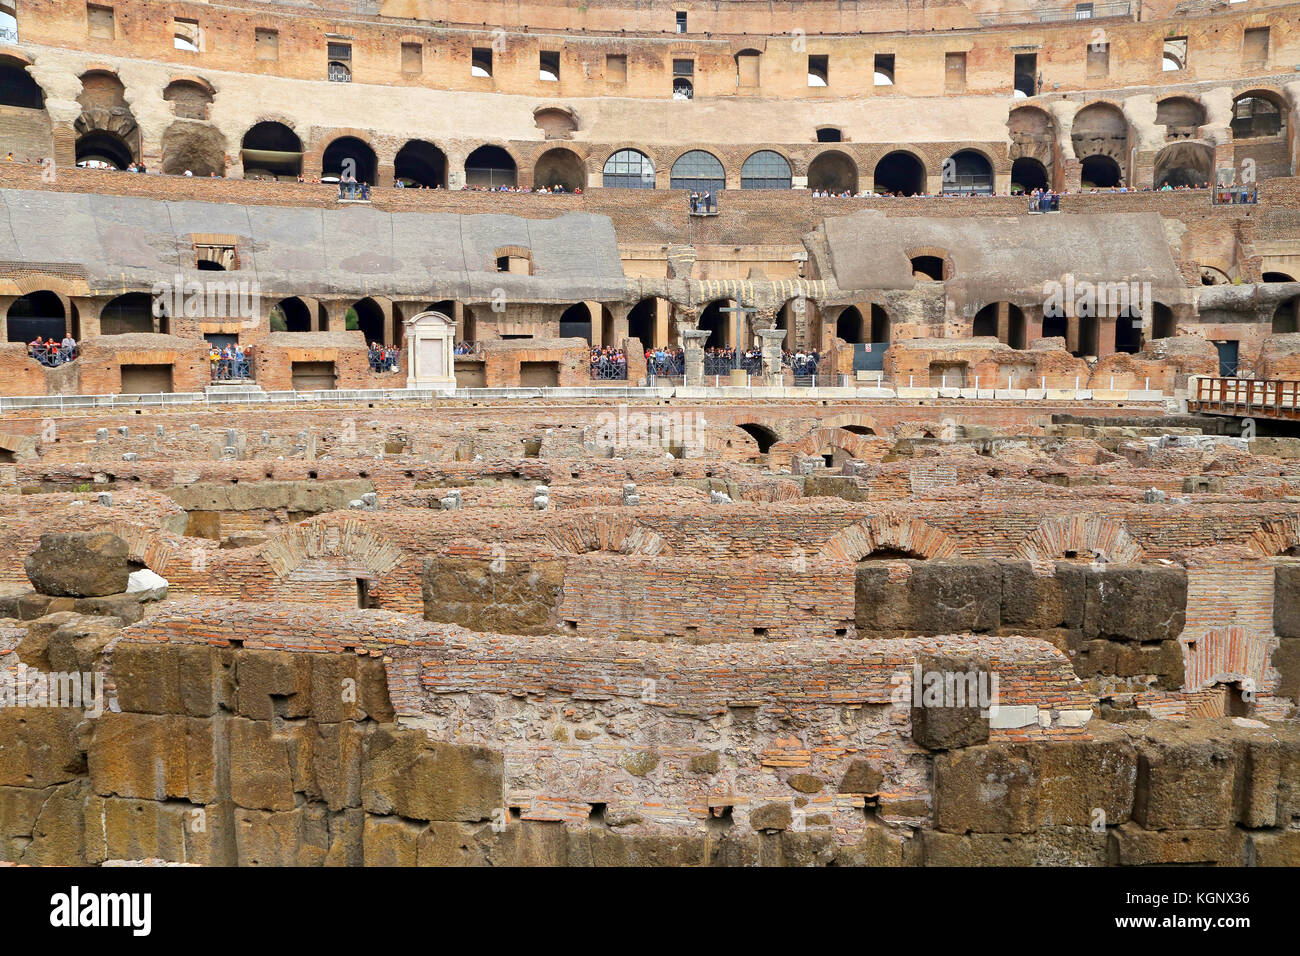 ROMA, ITALY - 01 OCTOBER 2017: Colosseum, Coliseum or Coloseo, Flavian Amphitheatre largest ever built symbol of ancient Roma city in Roman Empire. Stock Photo